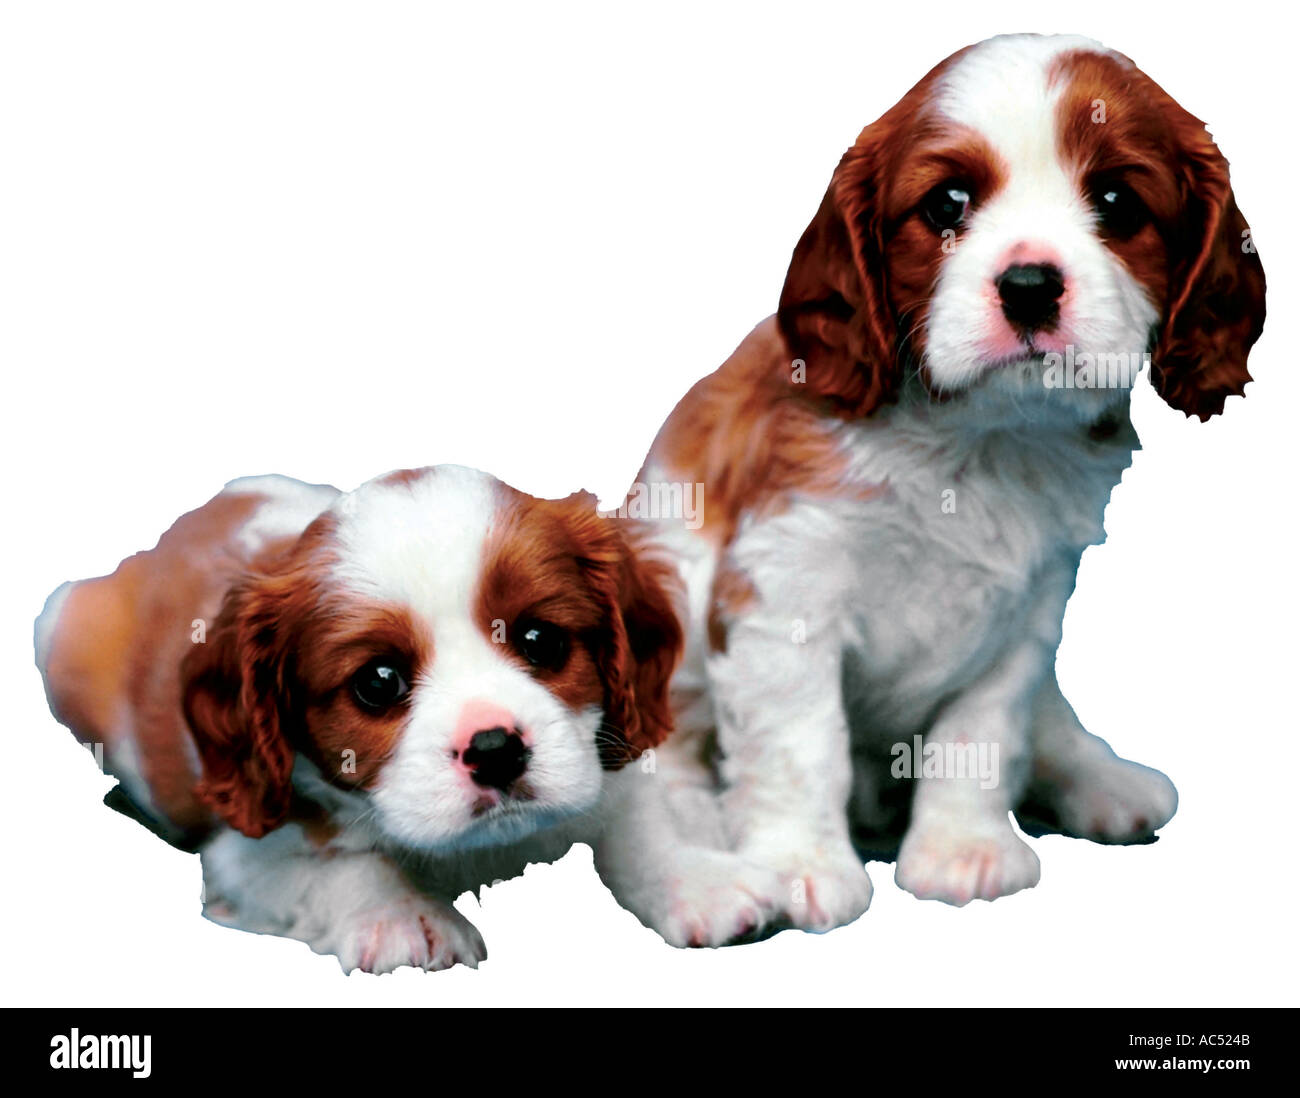 Animaux chiots king charles king charles chiots jpg jpg Banque D'Images